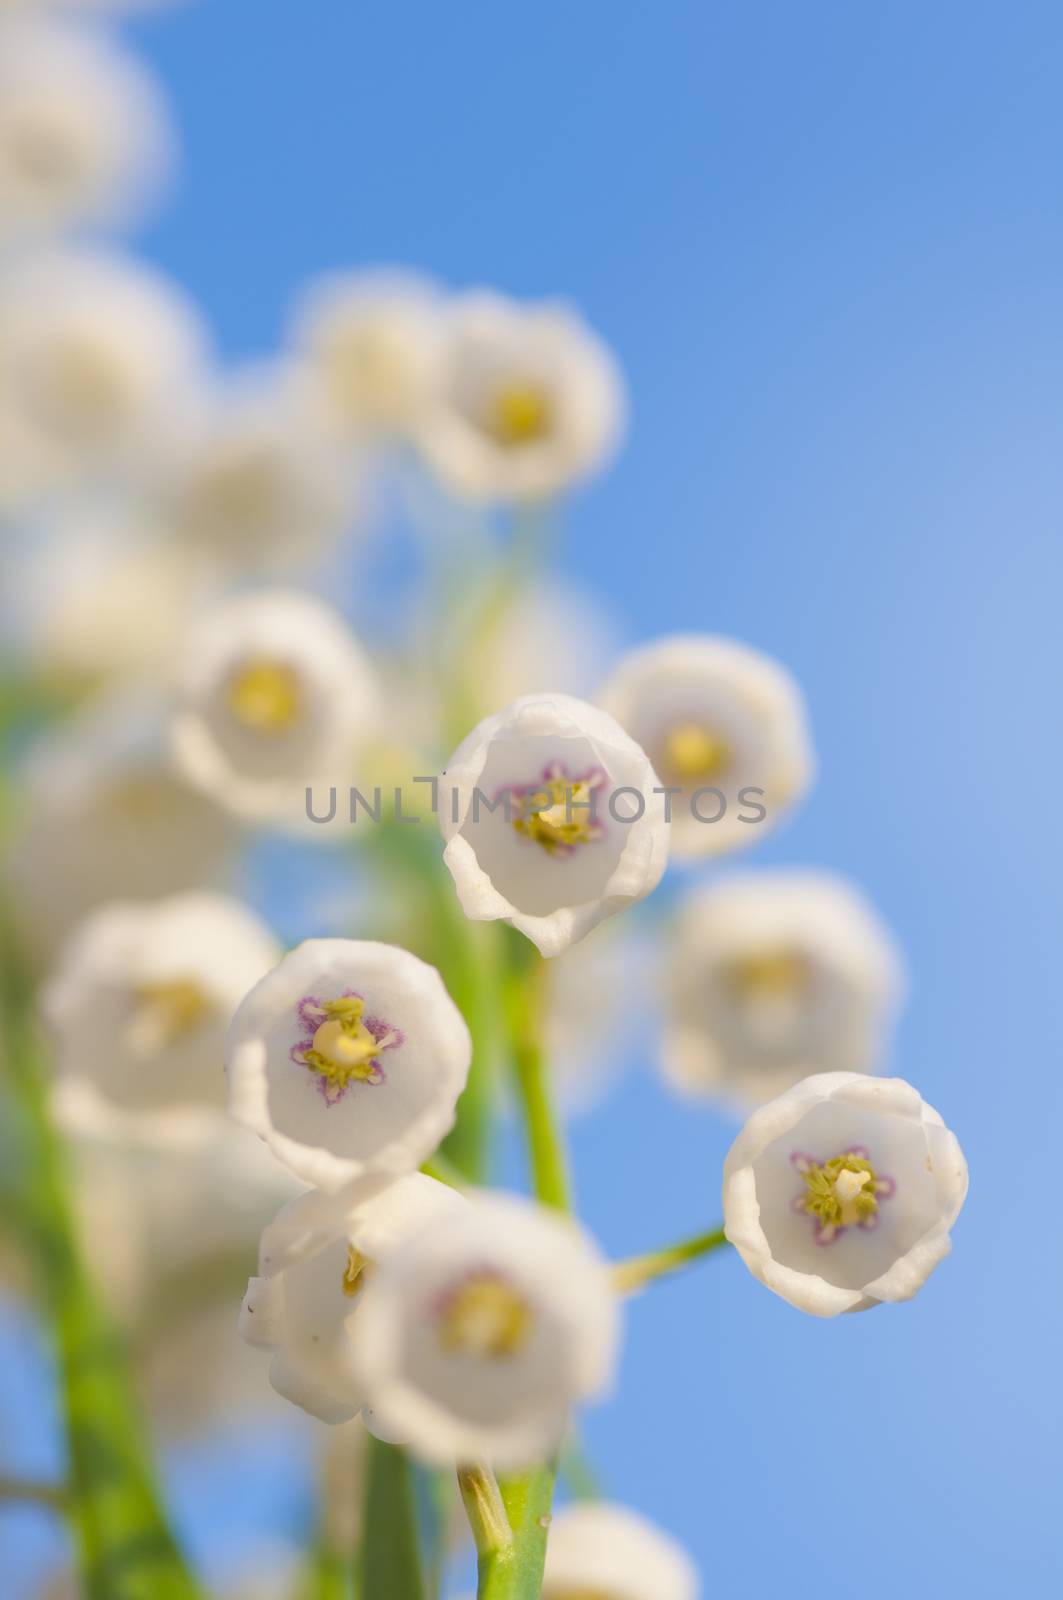  Lily of the valley by dred